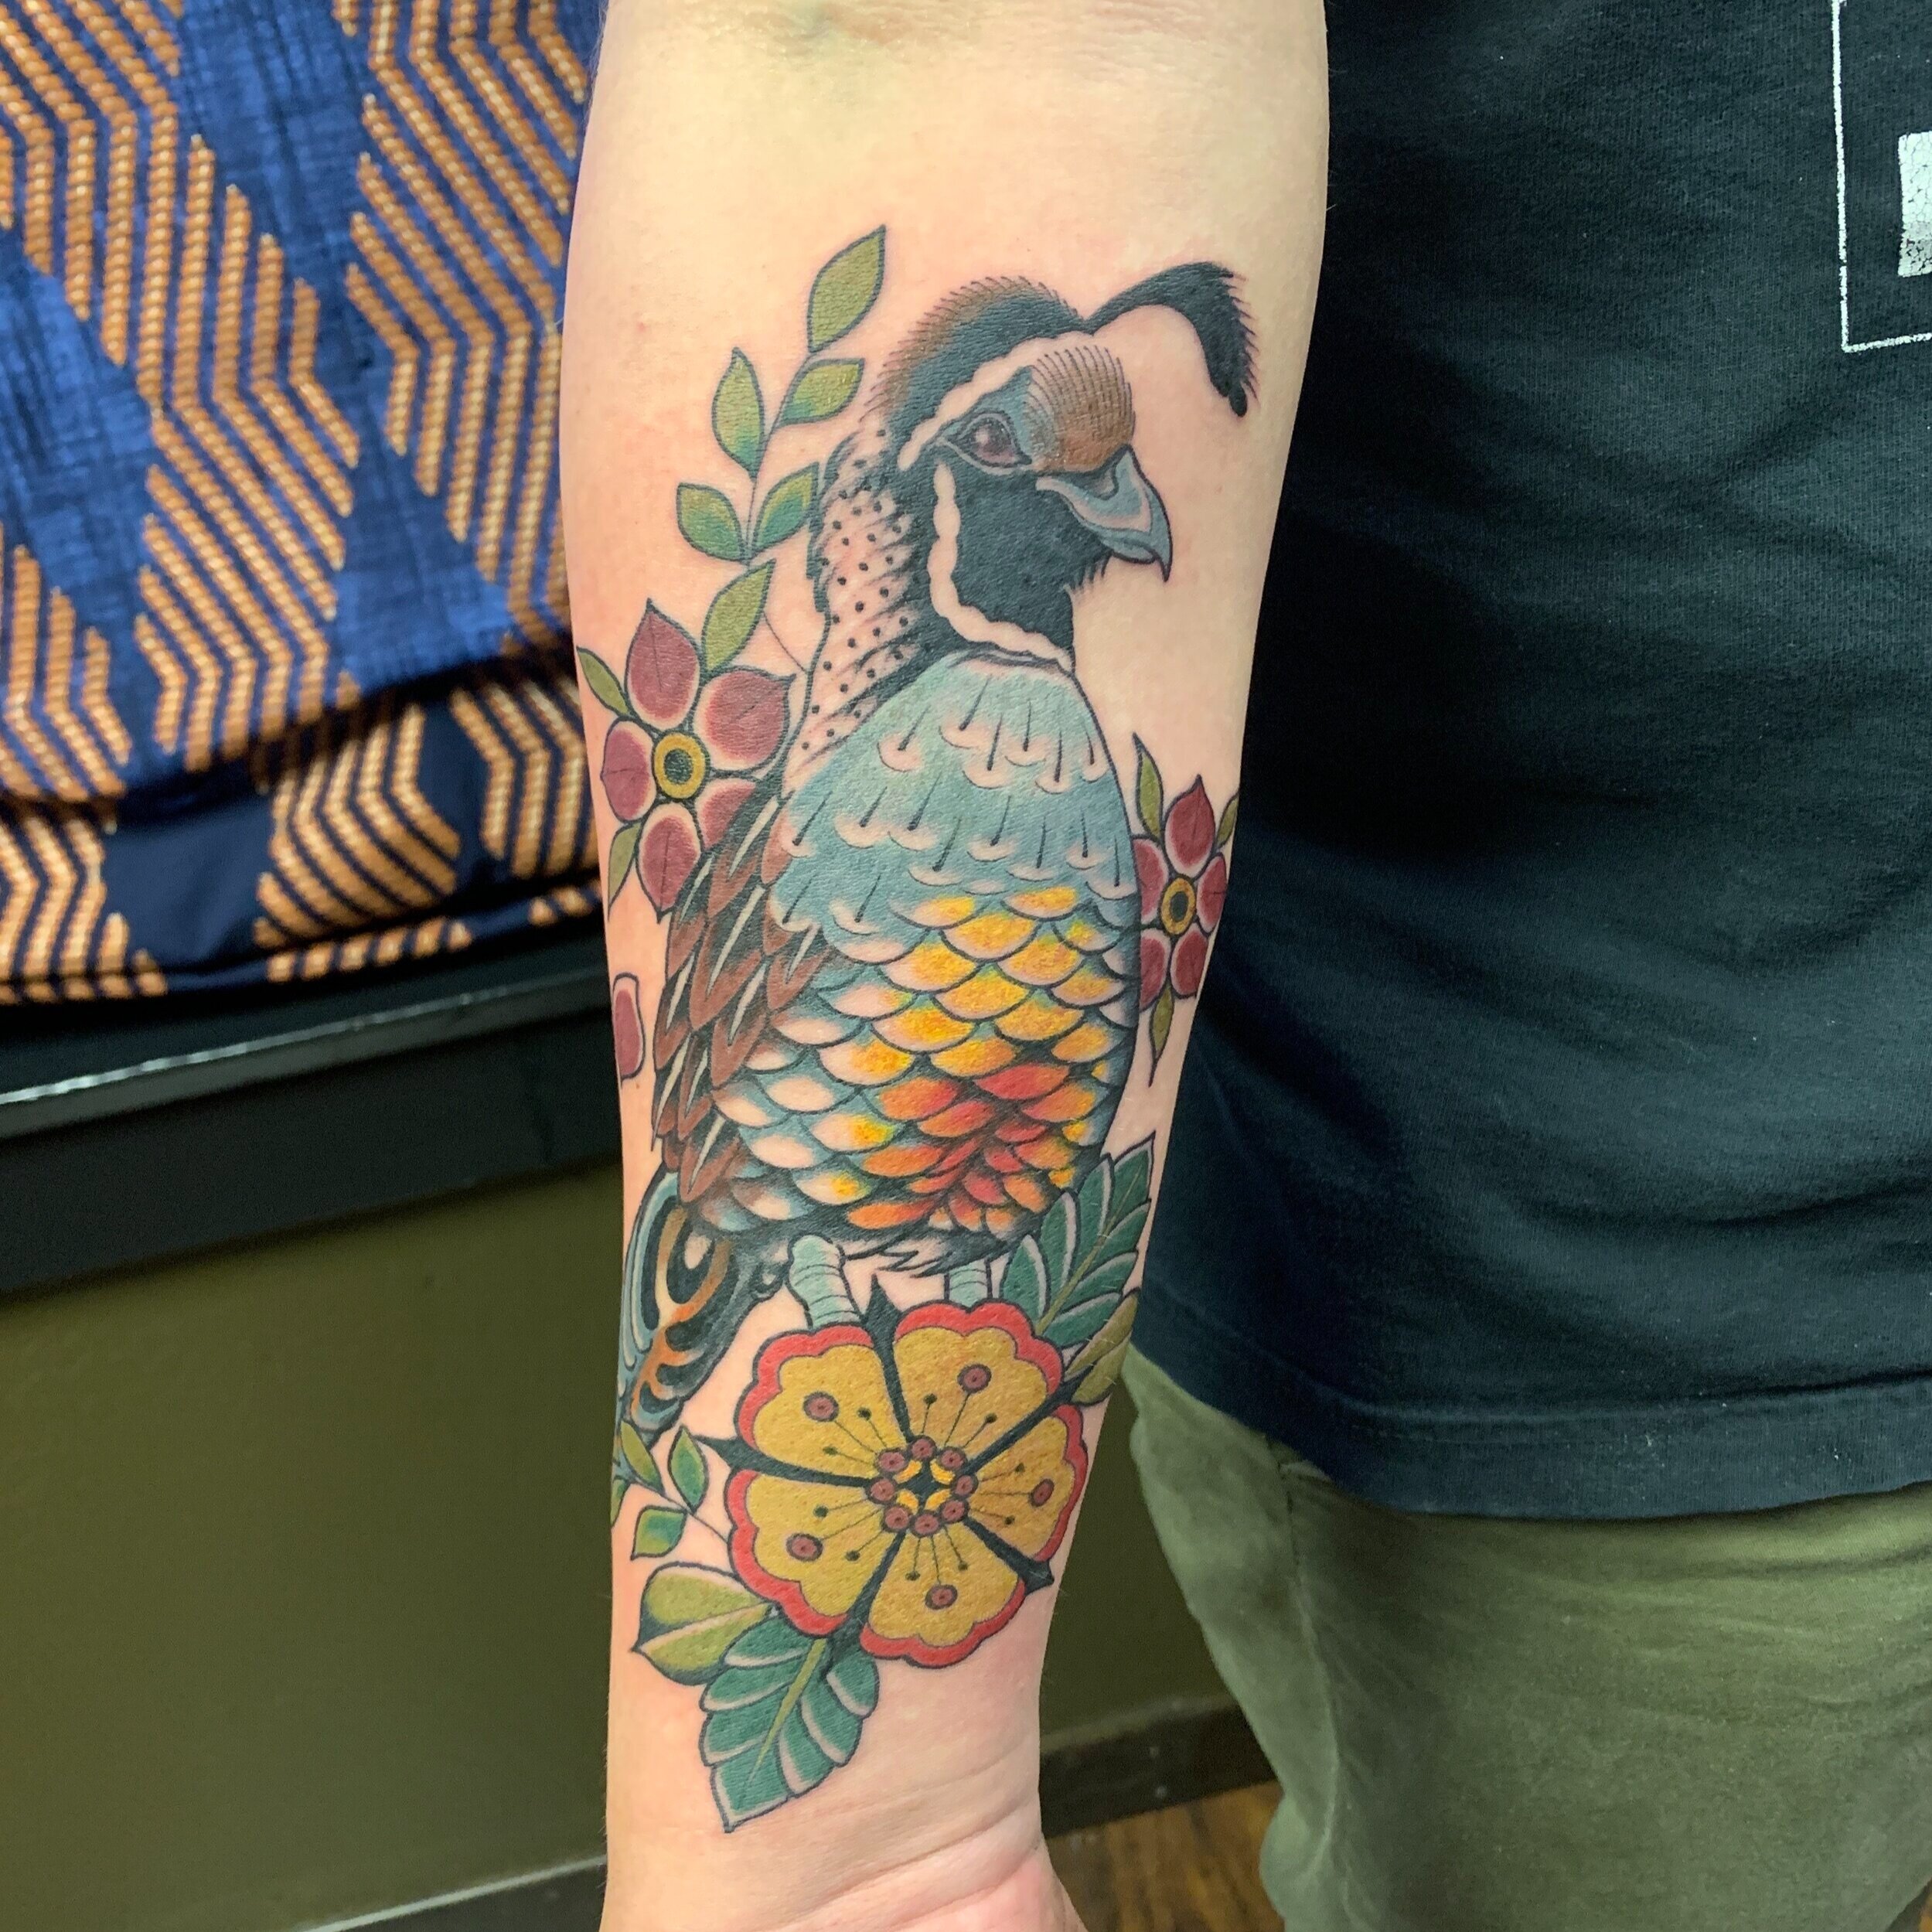 𝓜𝓔𝓜𝓔𝓝𝓣𝓞 𝓜𝓞𝓡𝓘 𝓣𝓐𝓣𝓣𝓞𝓞 on Instagram California quail done  by henrydevertattoo  mementomori mementomoritattoo  mementomoritattoonapa tattooing napatattoo